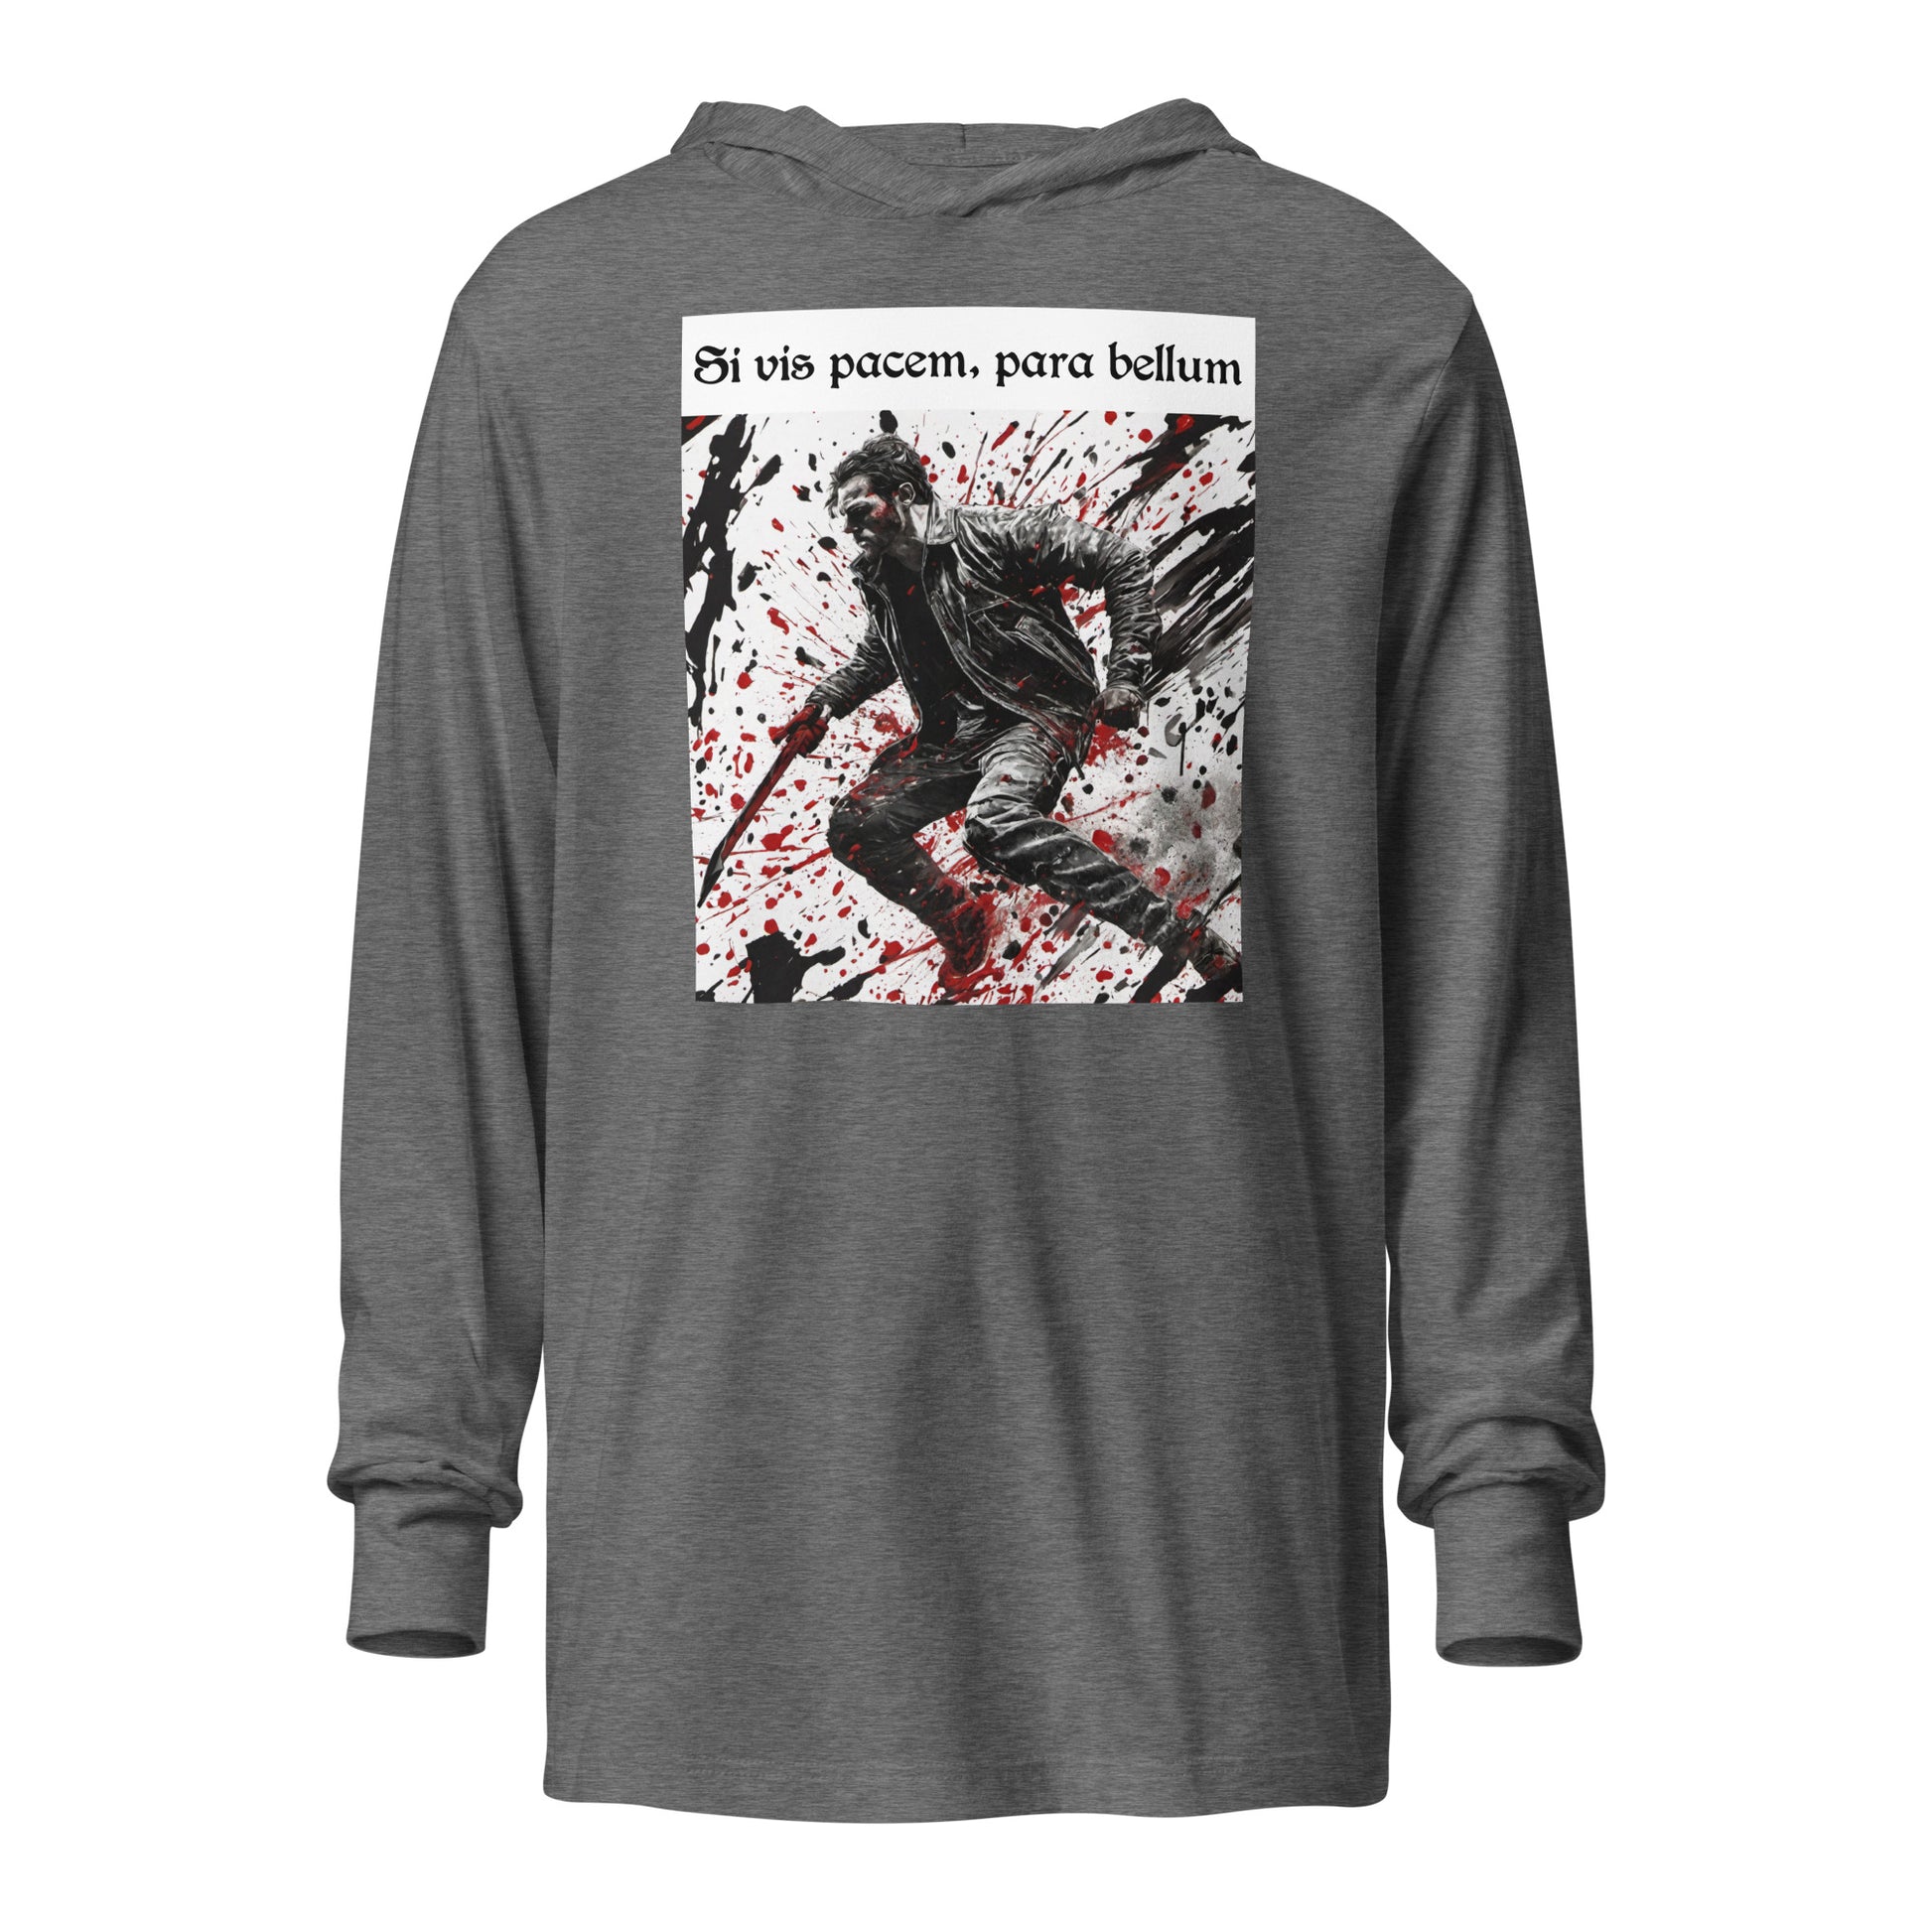 If You Want Peace, Prepare for War Men's Hooded Long-Sleeve Tee Grey Triblend